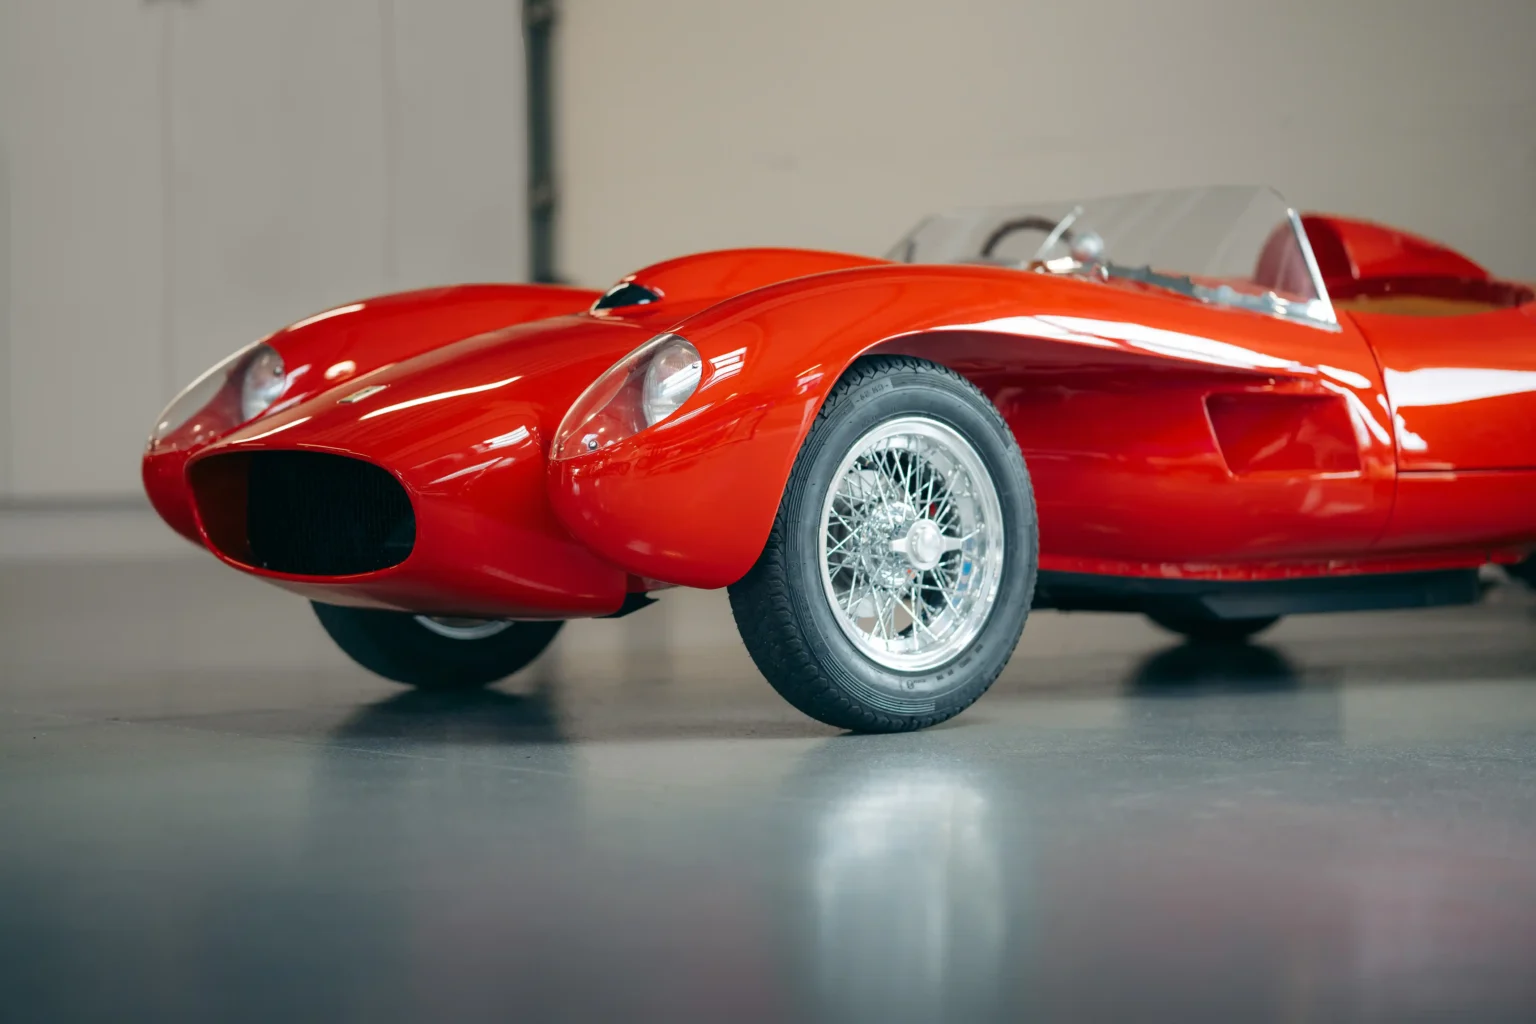 The ultimate toy car, a Ferrari Testa Rossa J, is on sale at Harrods for Christmas at £96,000. This battery-powered mini sports car reaches up to 50mph and is a collector's dream.